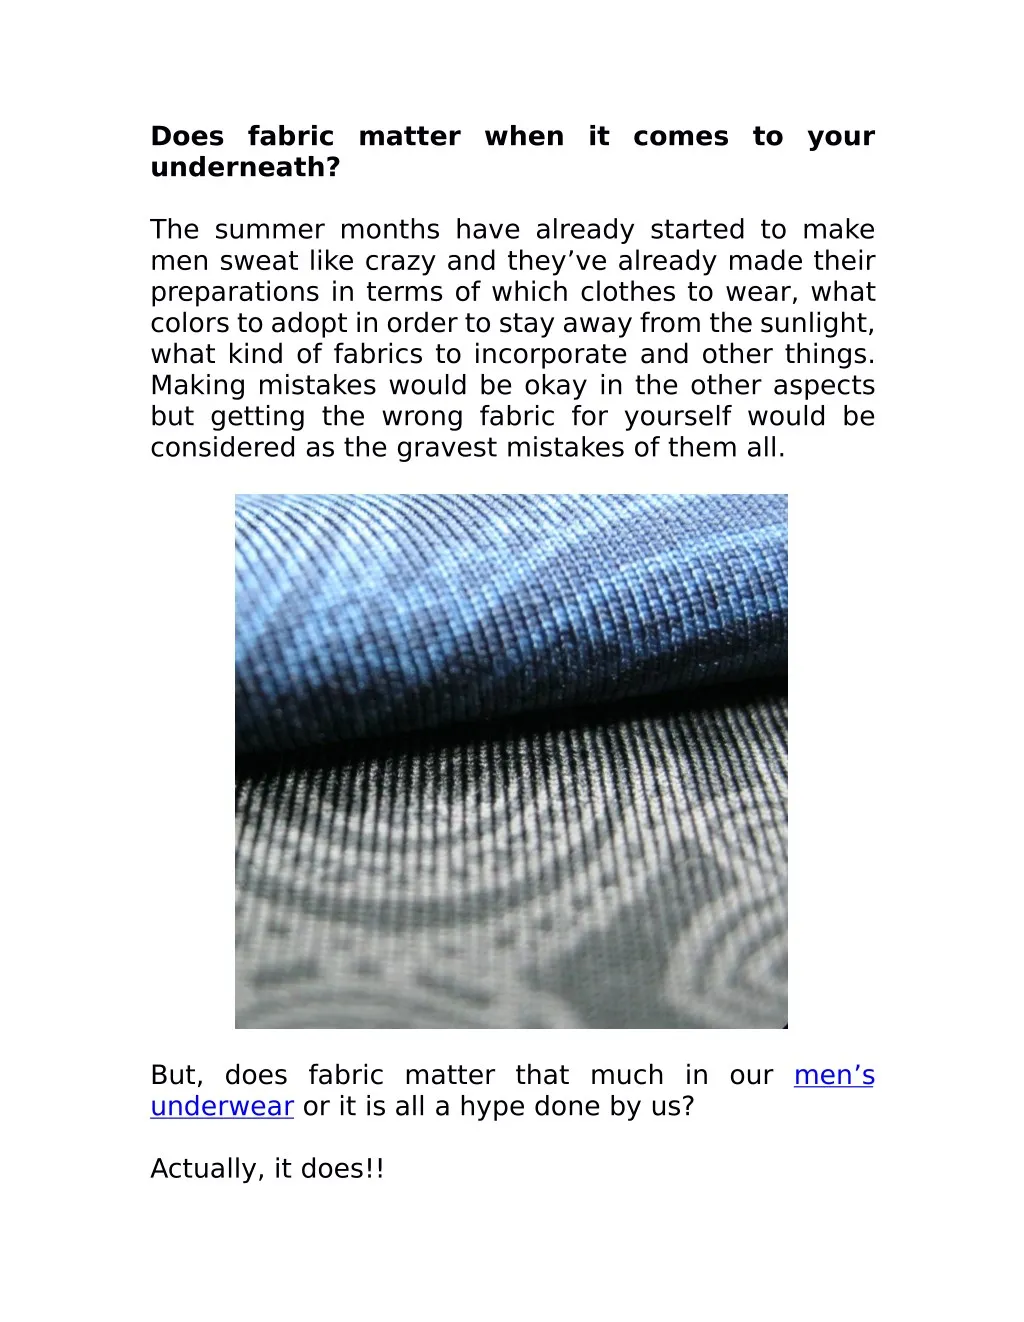 does fabric matter when it comes to your